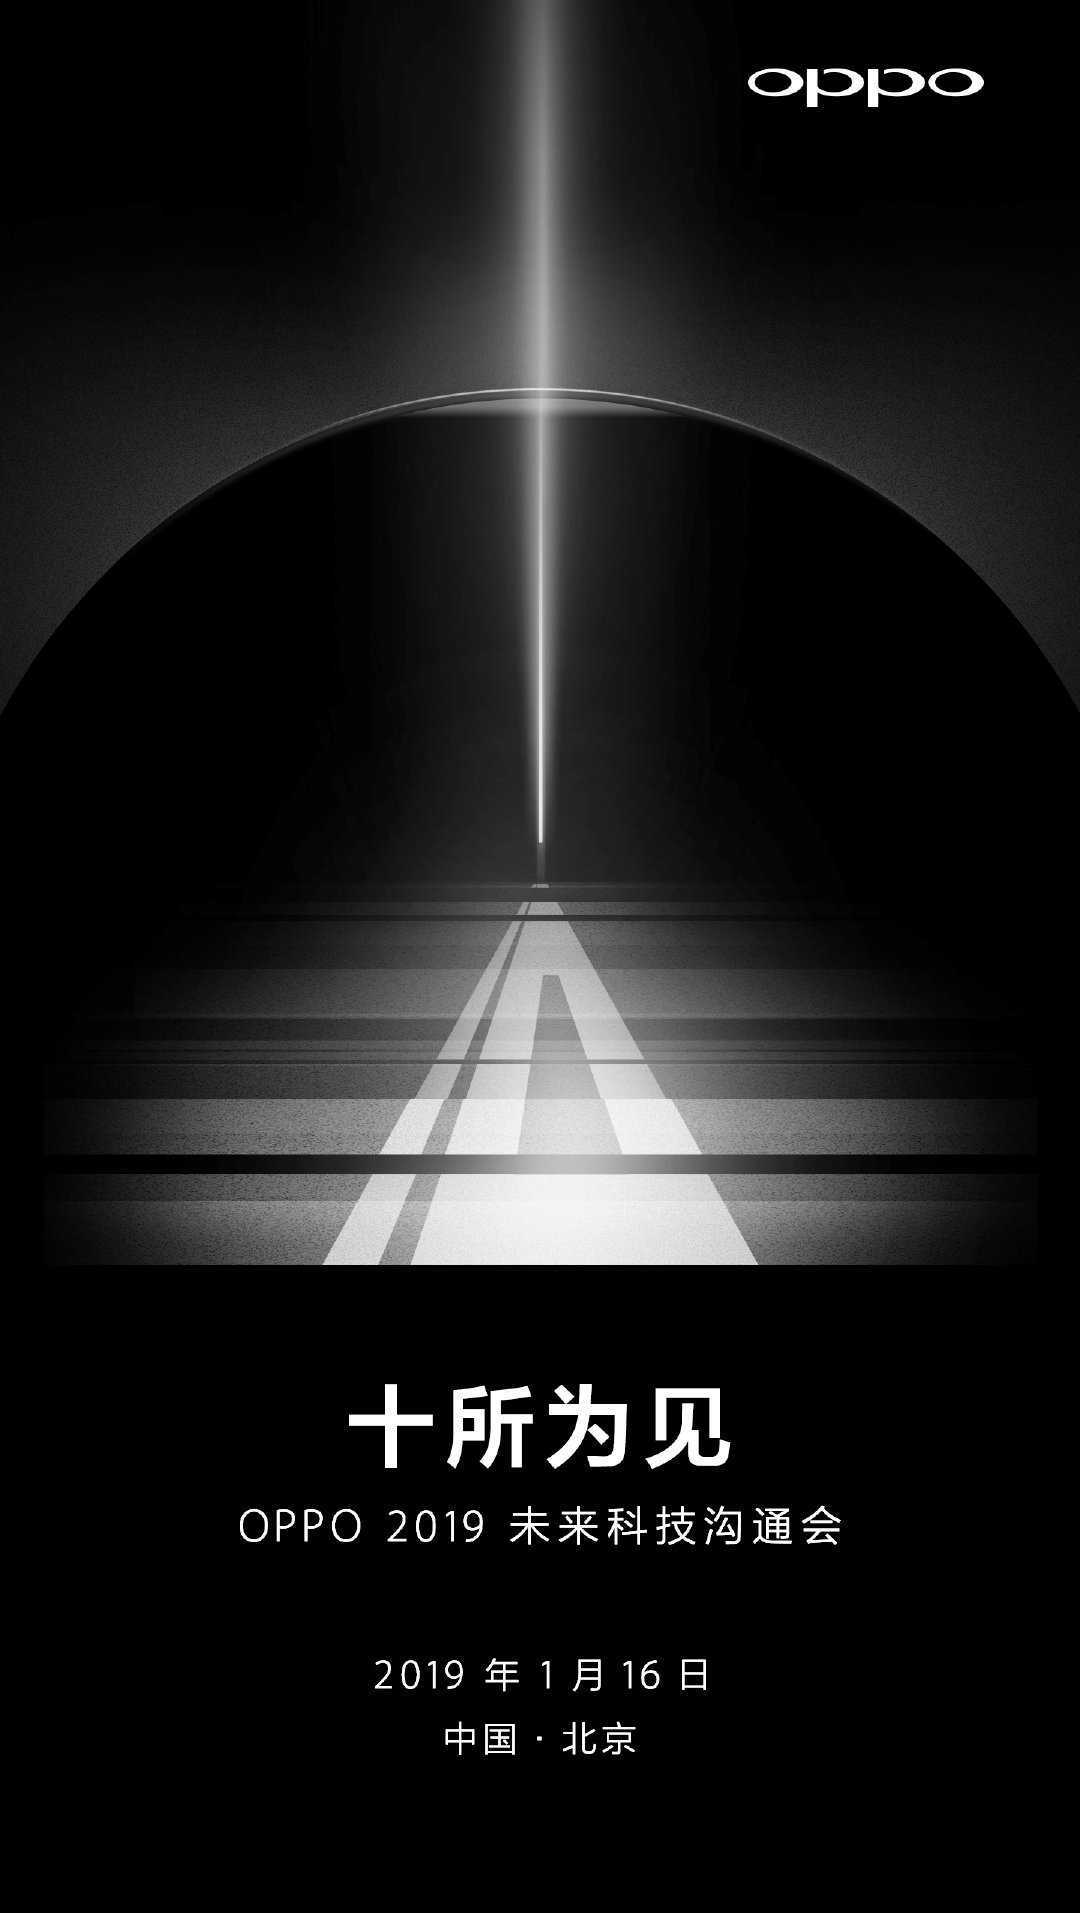 Leaked invitation hints at 10X hybrid optical zoom feature for new Oppo phones to be unveiled on January 16th - Will OnePlus 7 camera feature 10X hybrid optical zoom?